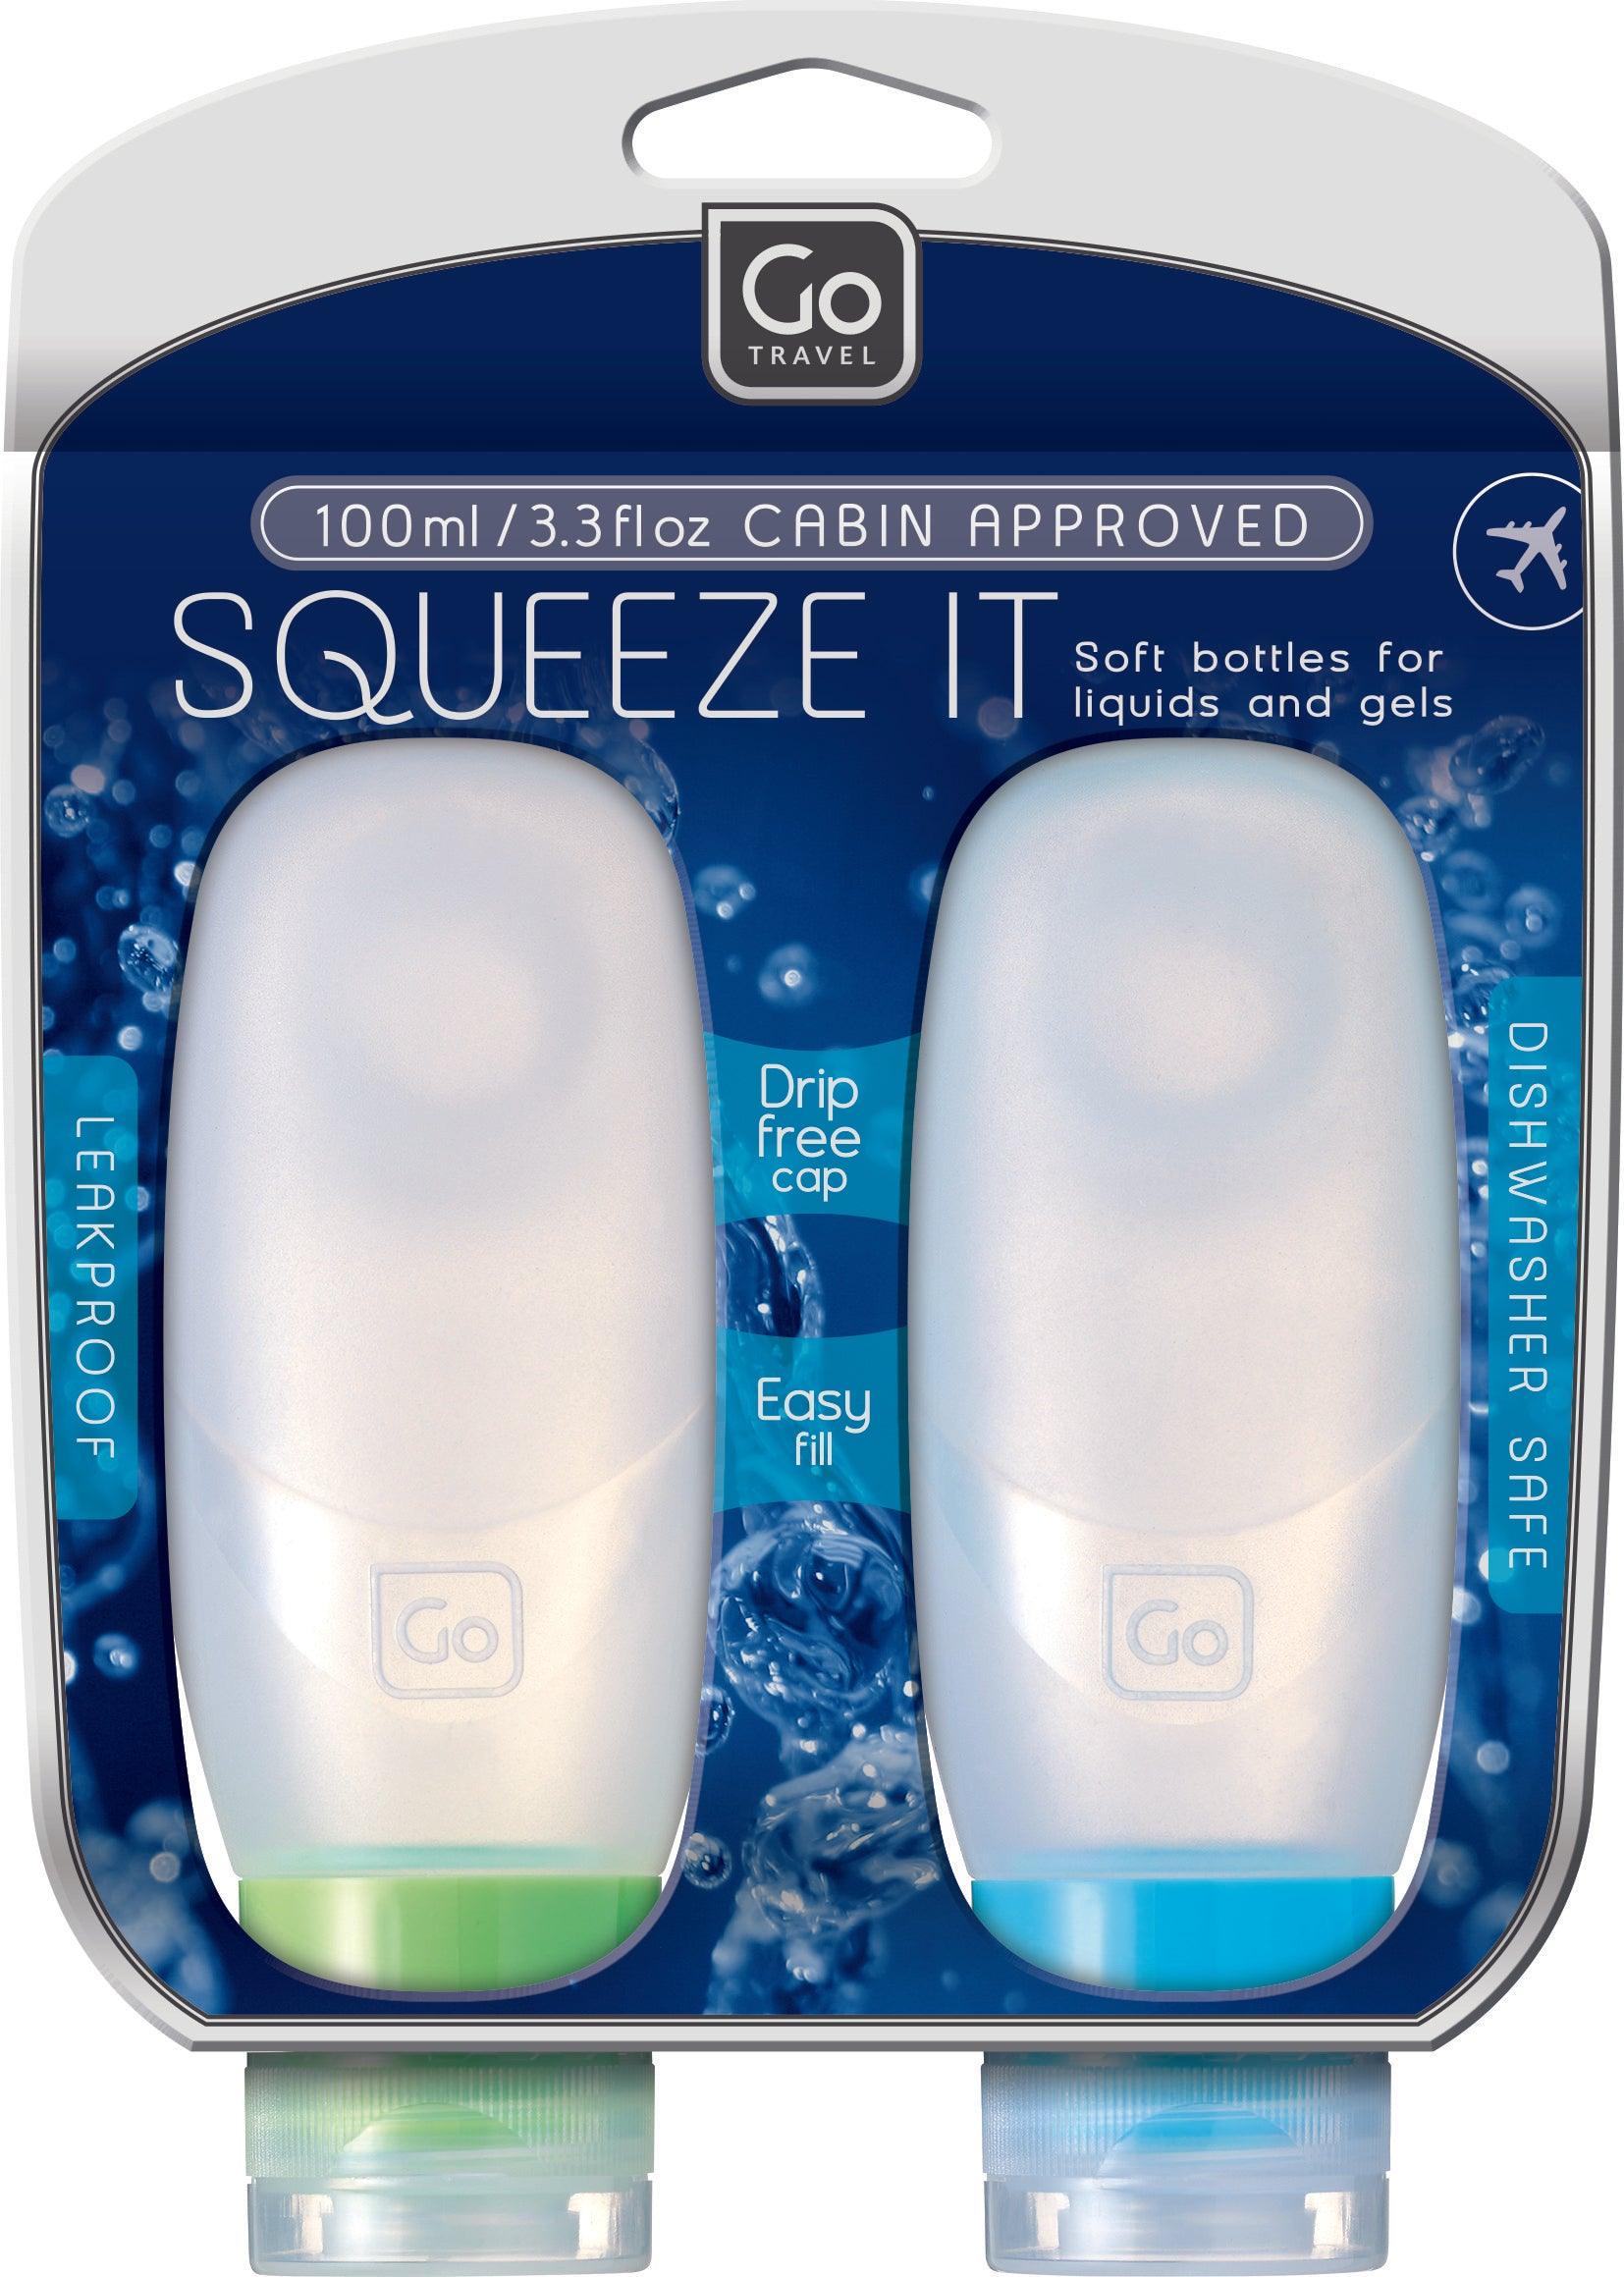 Squeezy Bottles - Voyage Luggage